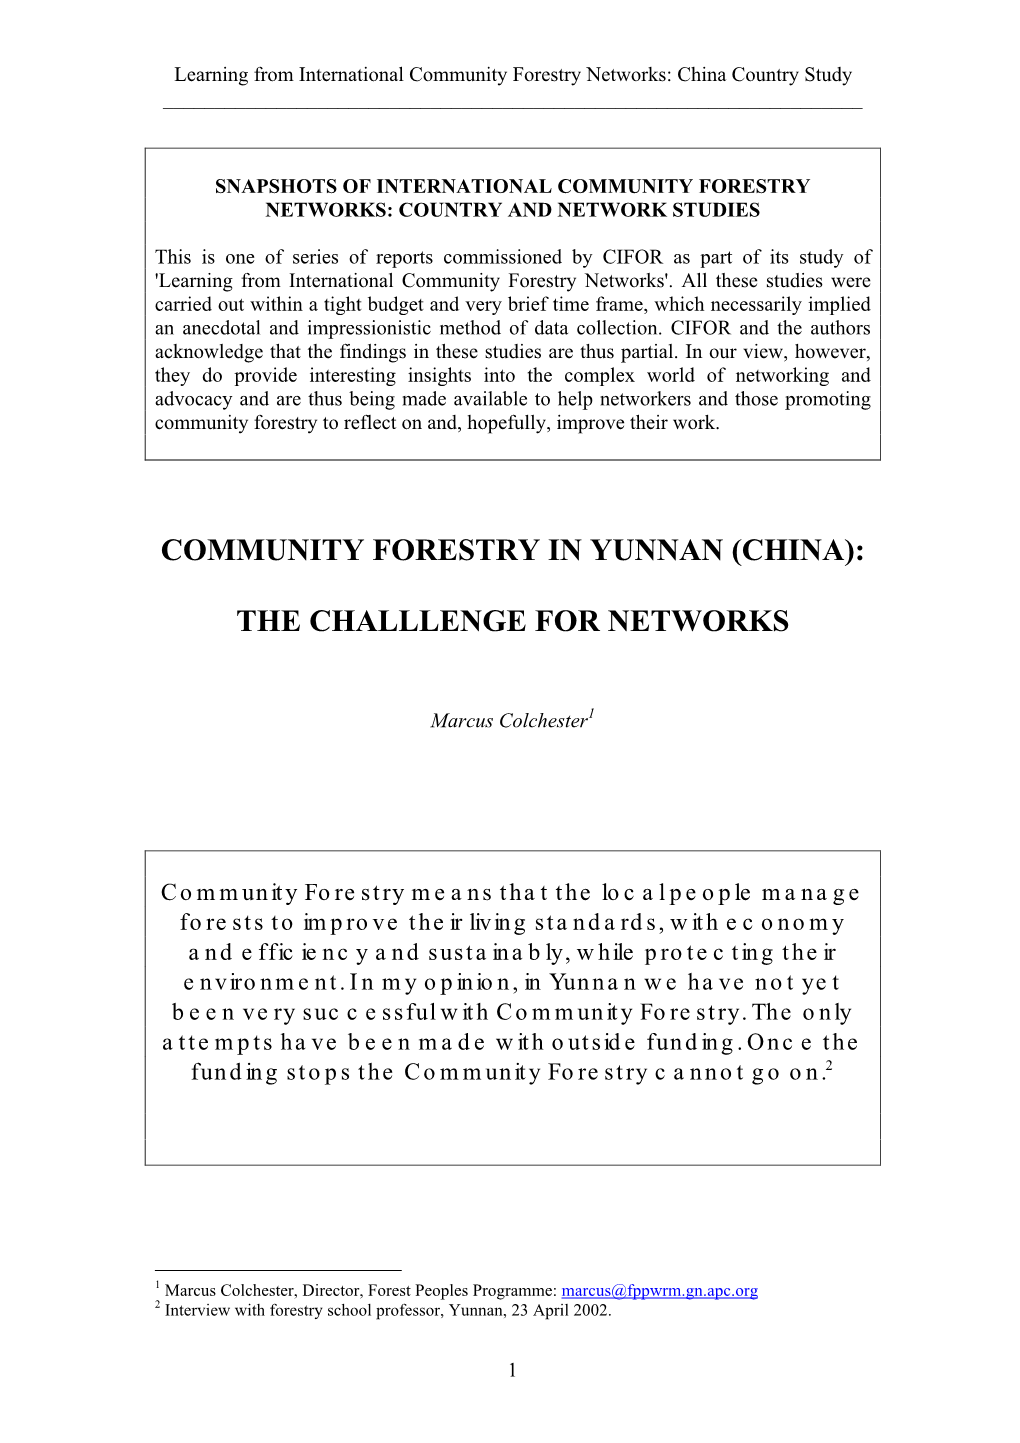 Community Forestry in Yunnan (China): the Challenge for Networks